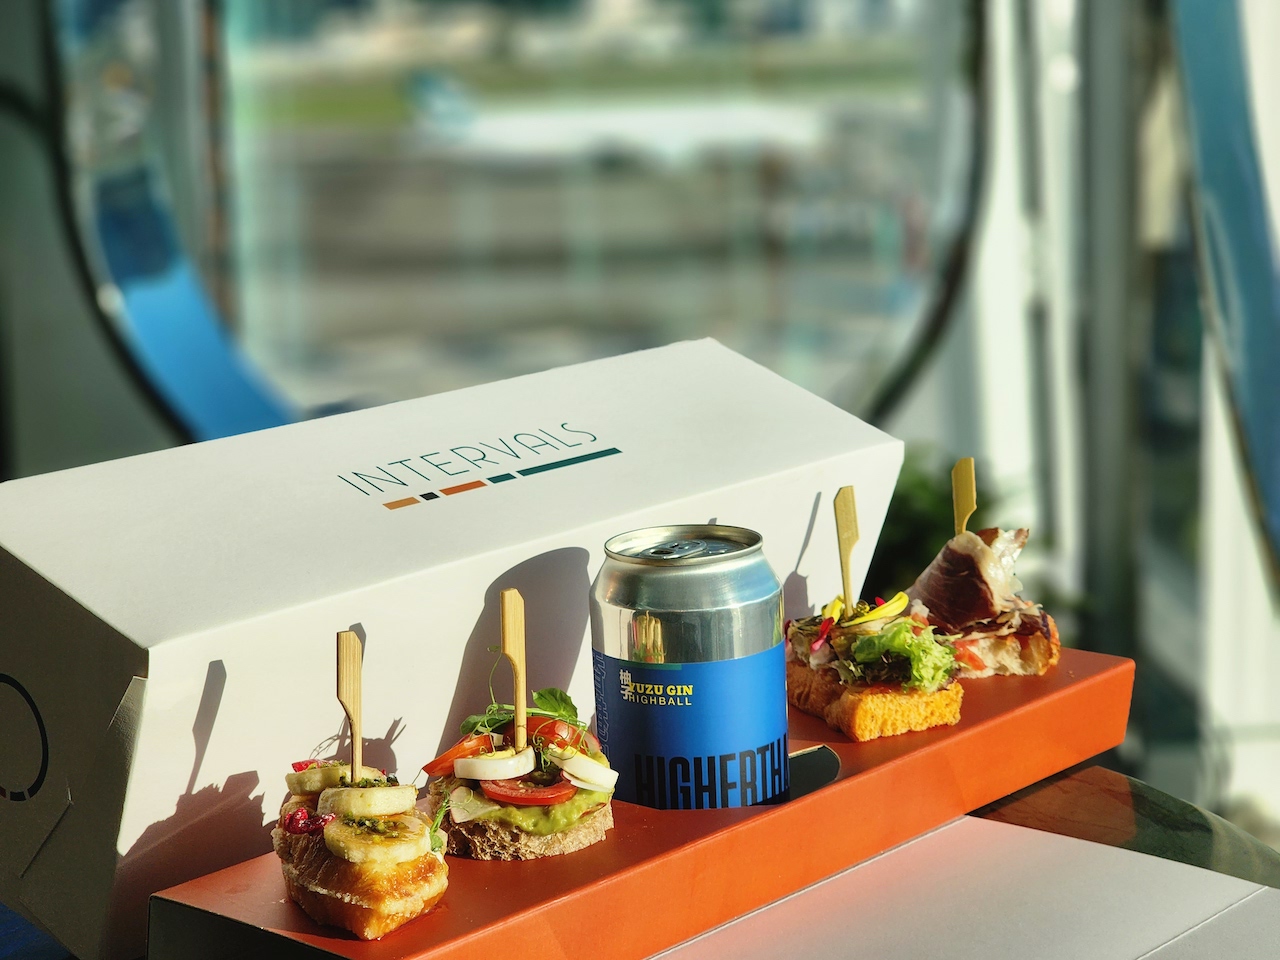 Since opening in June, Intervals at Hong Kong International Airport has set out to reinvent the airport experience by offering world-class cocktails and an elevated food programme.